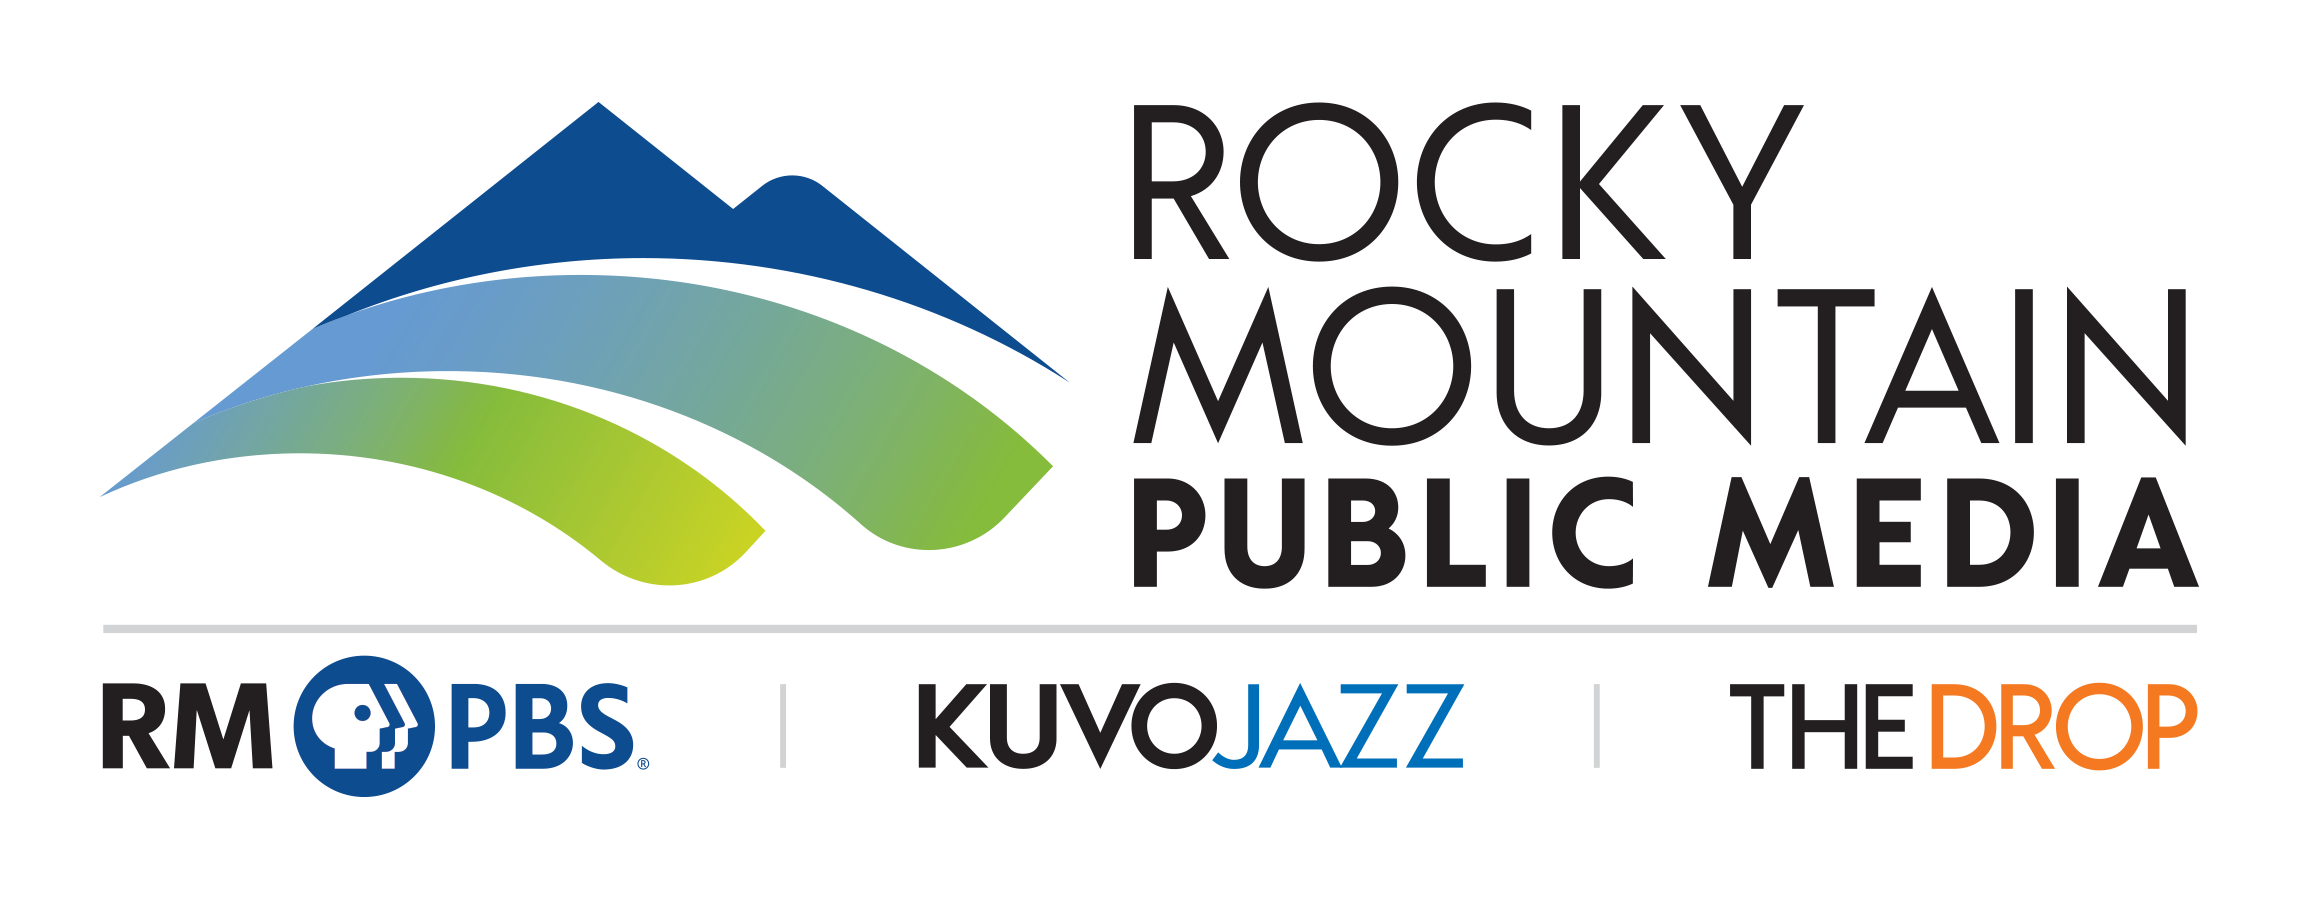 Green and blue logo for Rocky Mountain Public Media with RMPHS, KUVOJAZZ, and The Drop included.